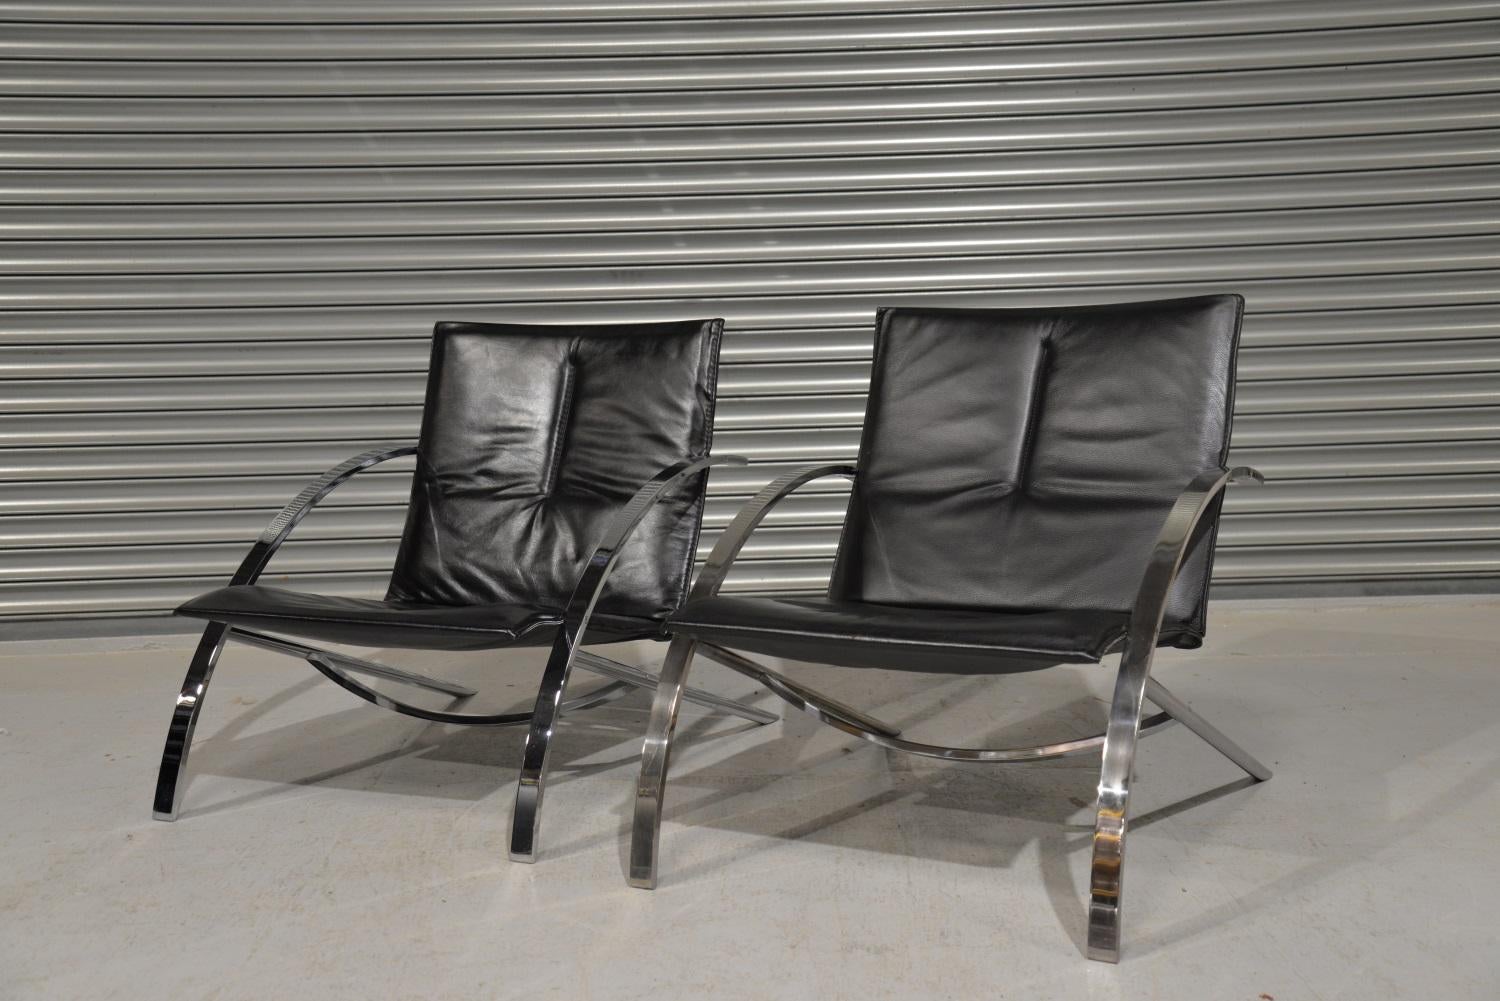 Paul Tuttle Arco Lounge Chairs for Strässle of Switzerland, 1970s For Sale 1